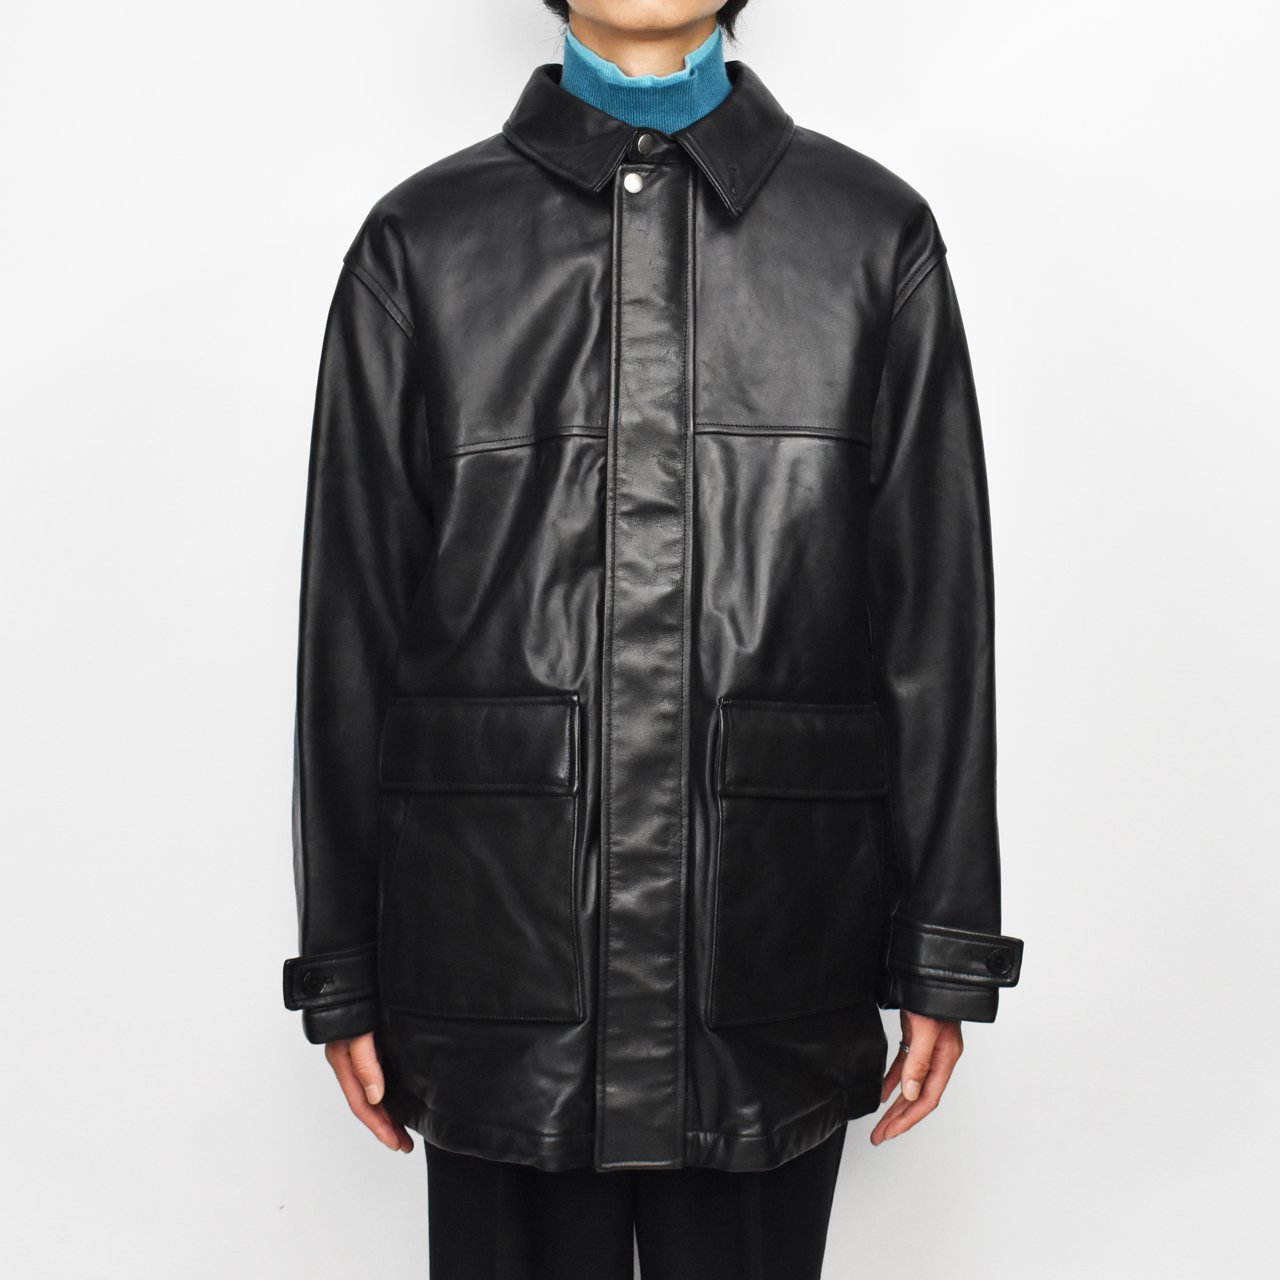 UNIVERSAL PRODUCTS (ユニバーサルプロダクツ)23FW/秋冬
SHEEP LEATHER CARCOAT BLACK